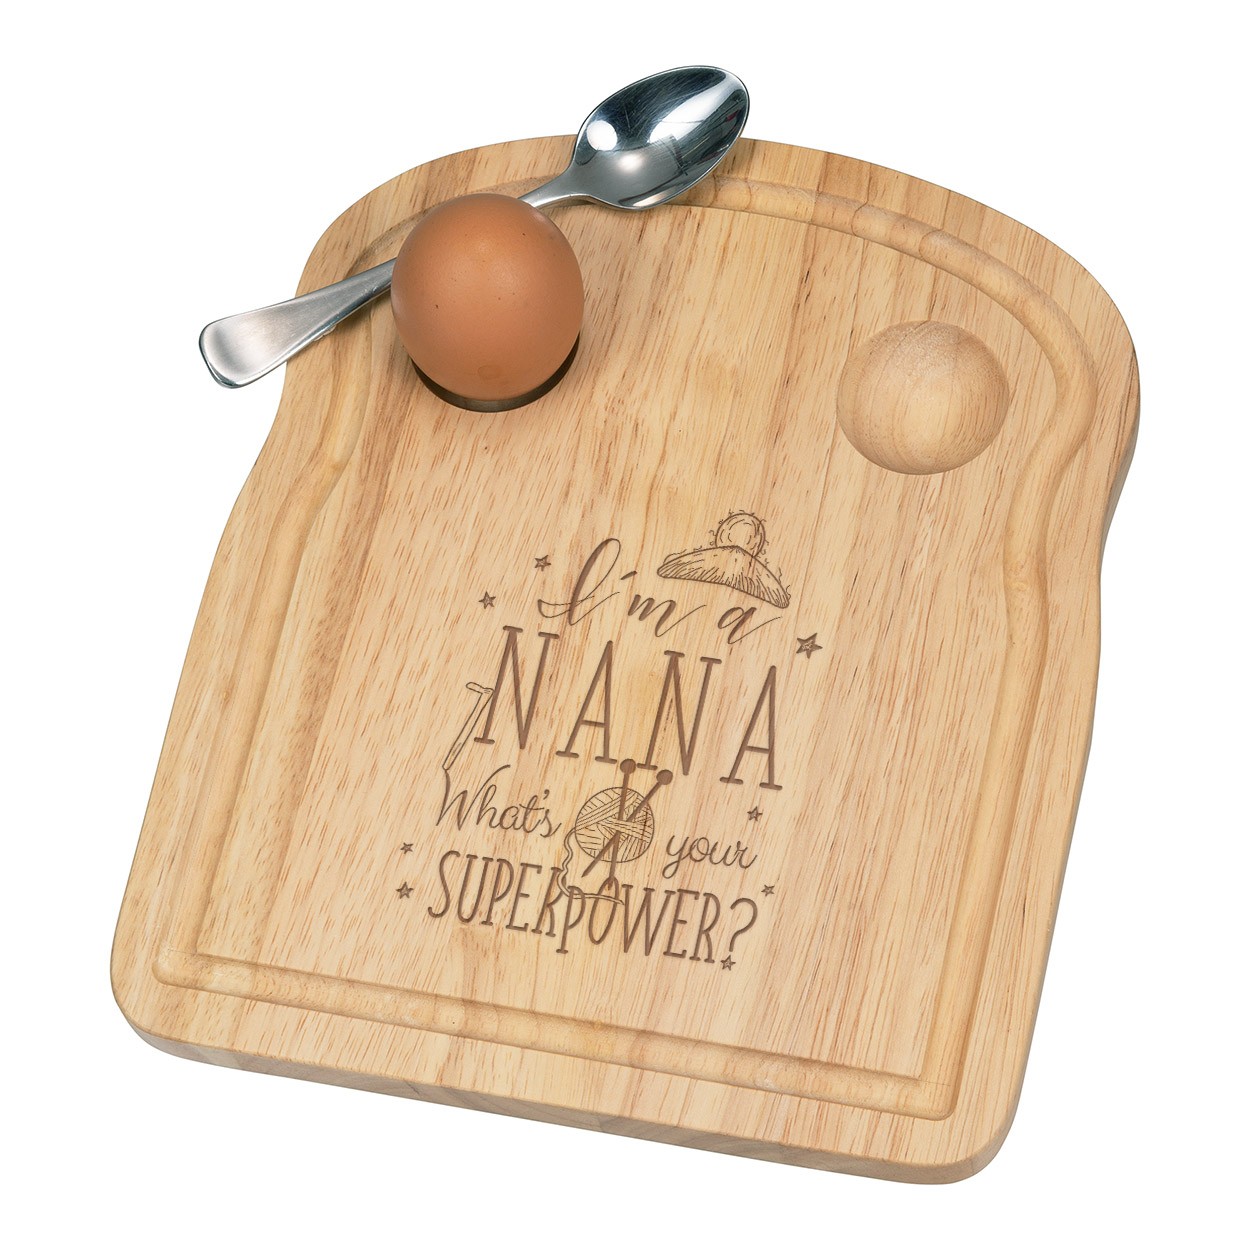 I'm A Nana What's Your Superpower Breakfast Dippy Egg Cup Board Wooden